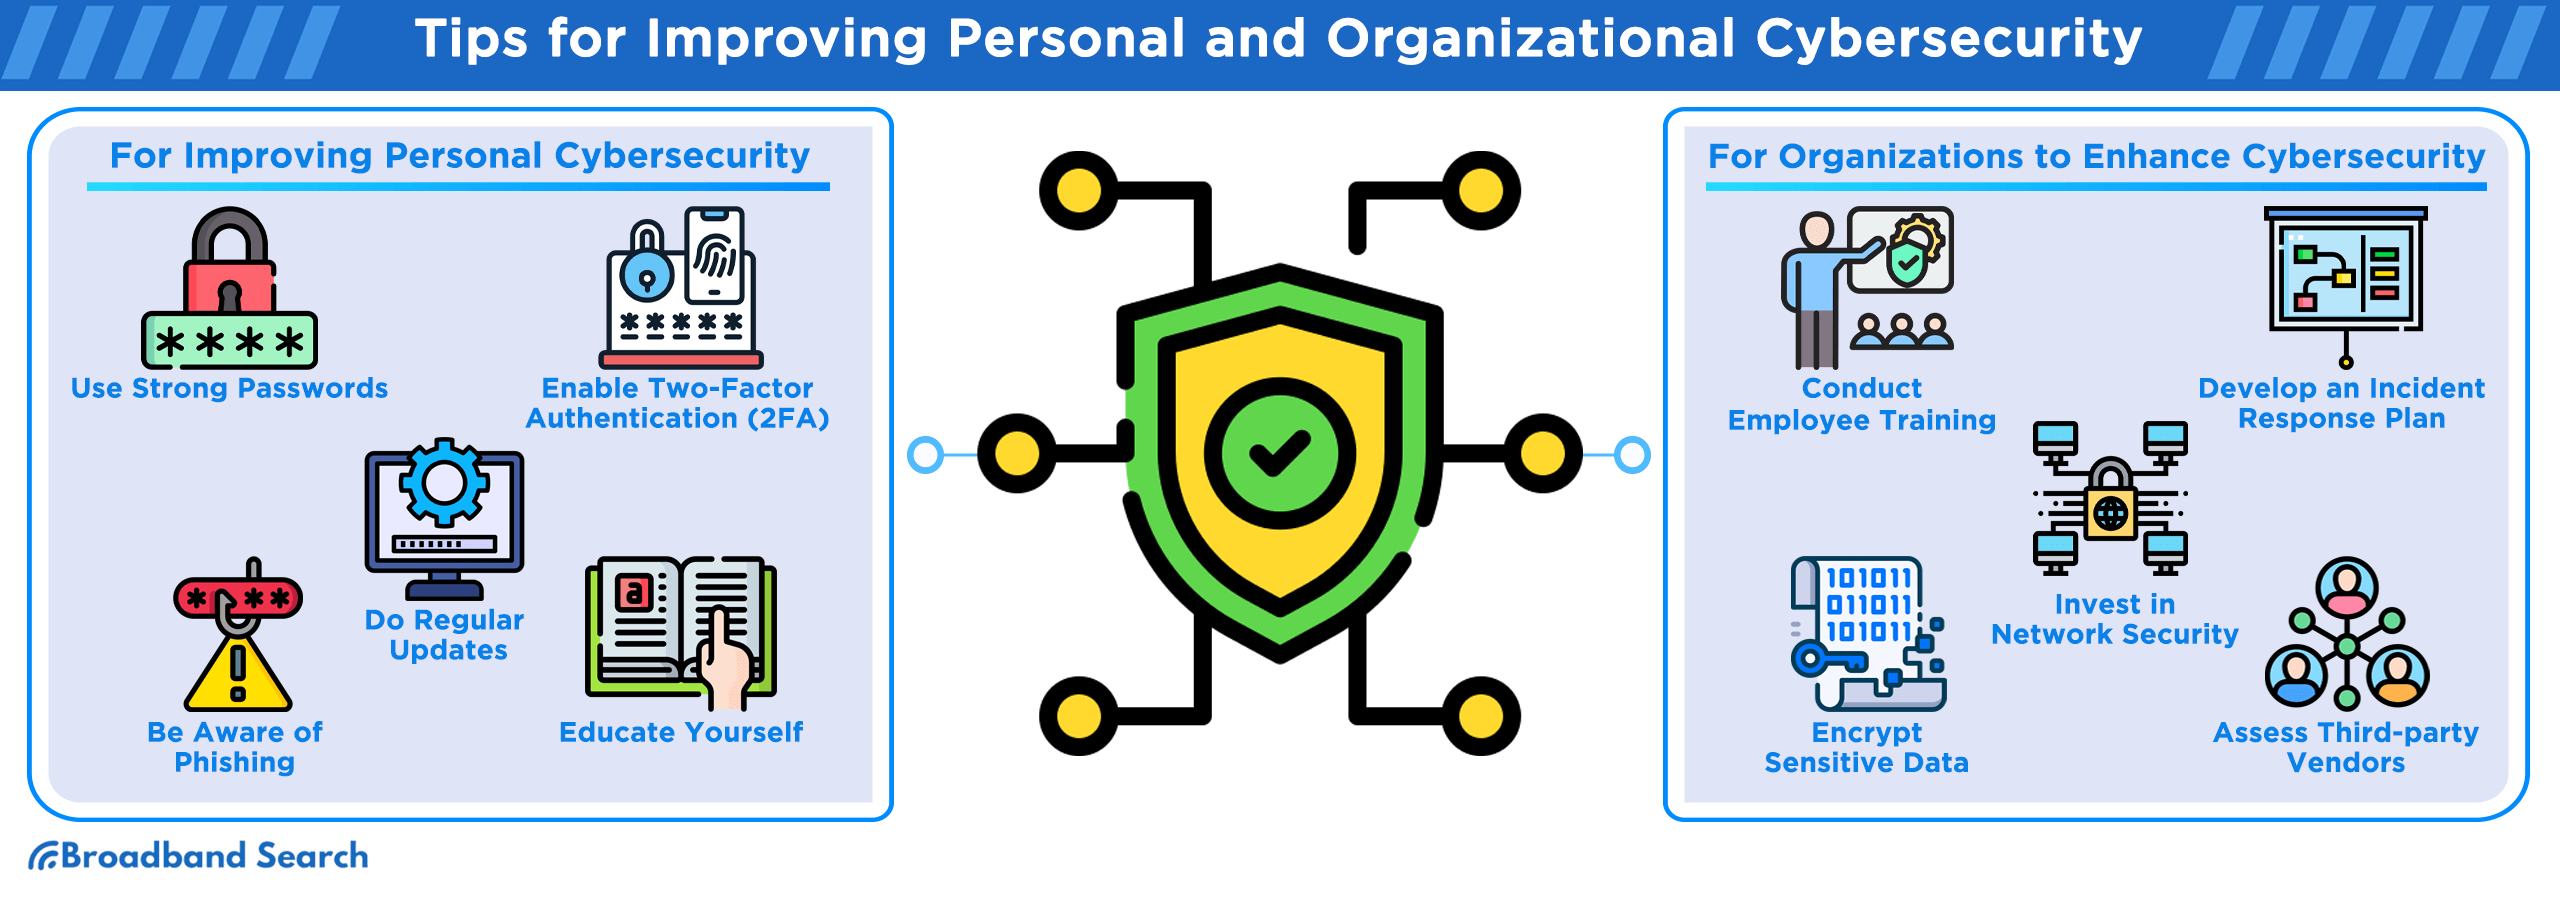 tips for improving personal and organizational cybersecurity